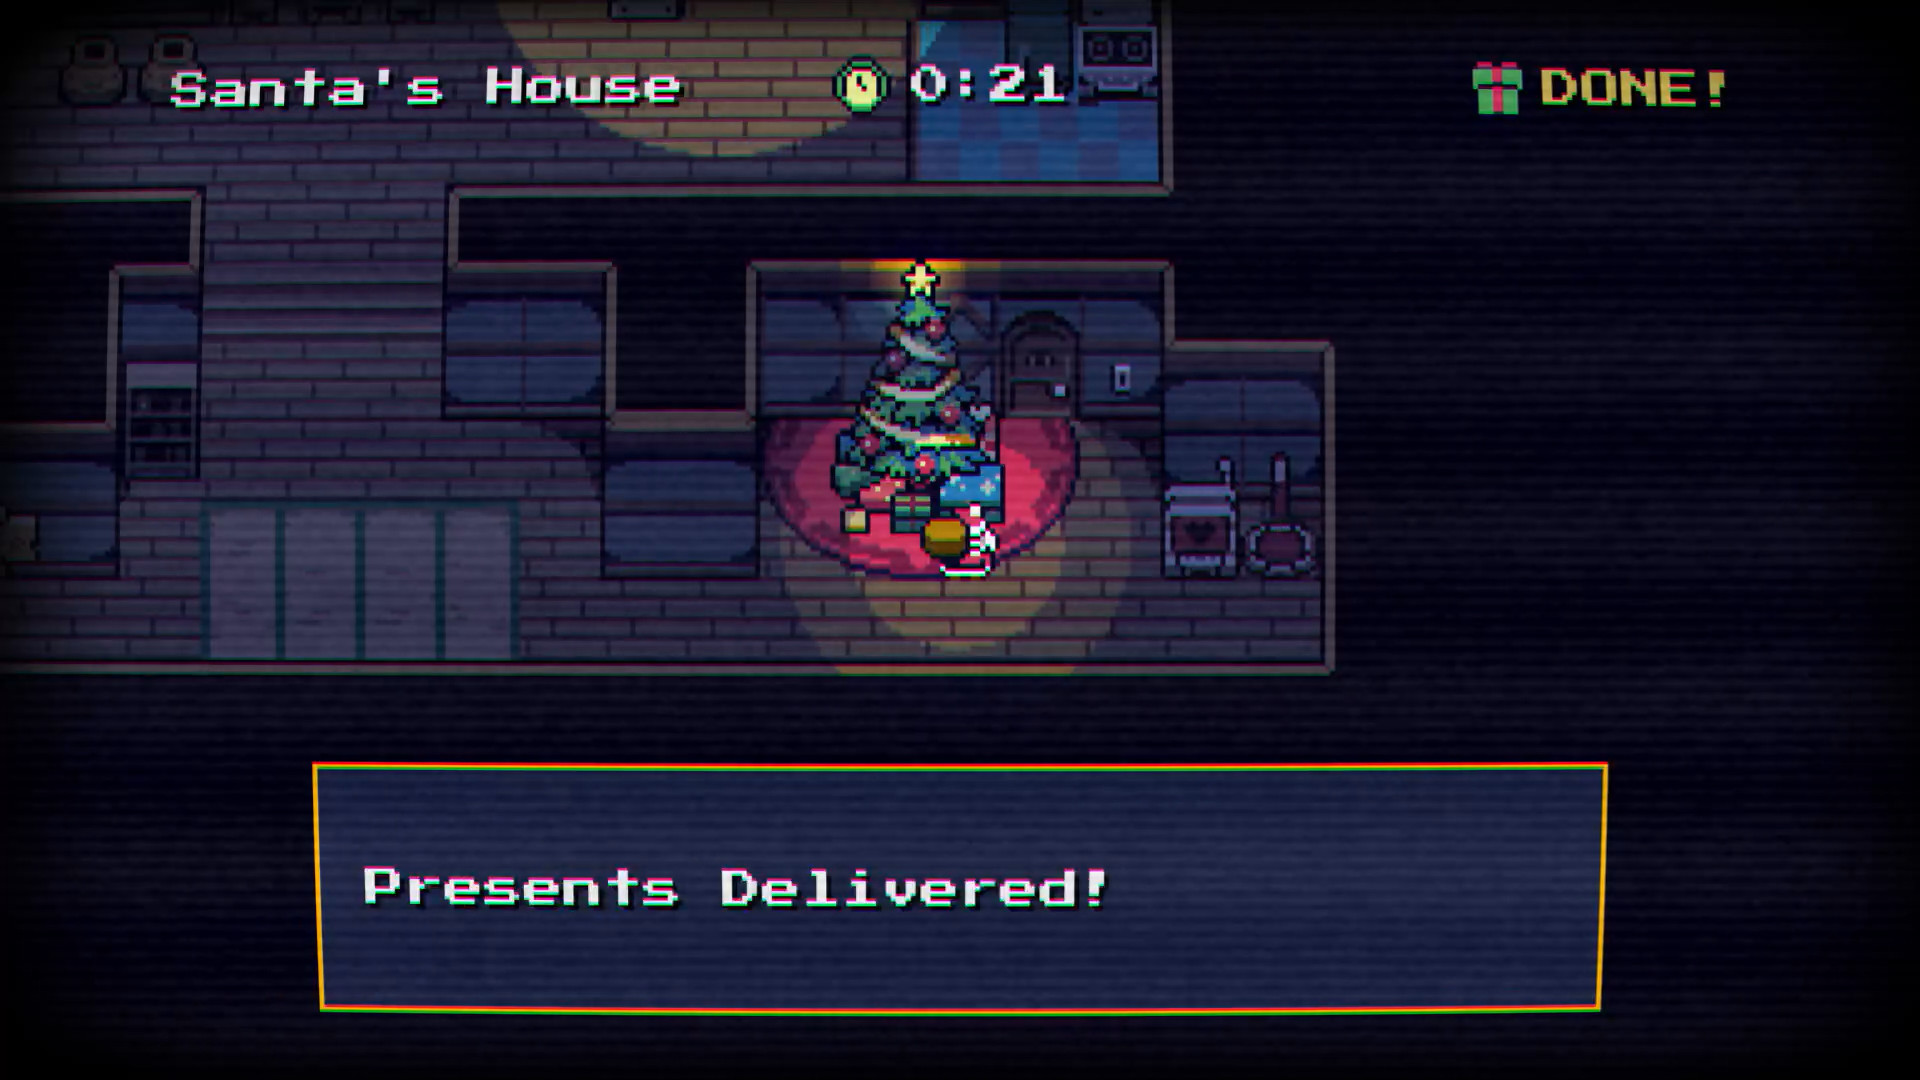 Cave Story's Secret Santa available now for free as a limited-time offer